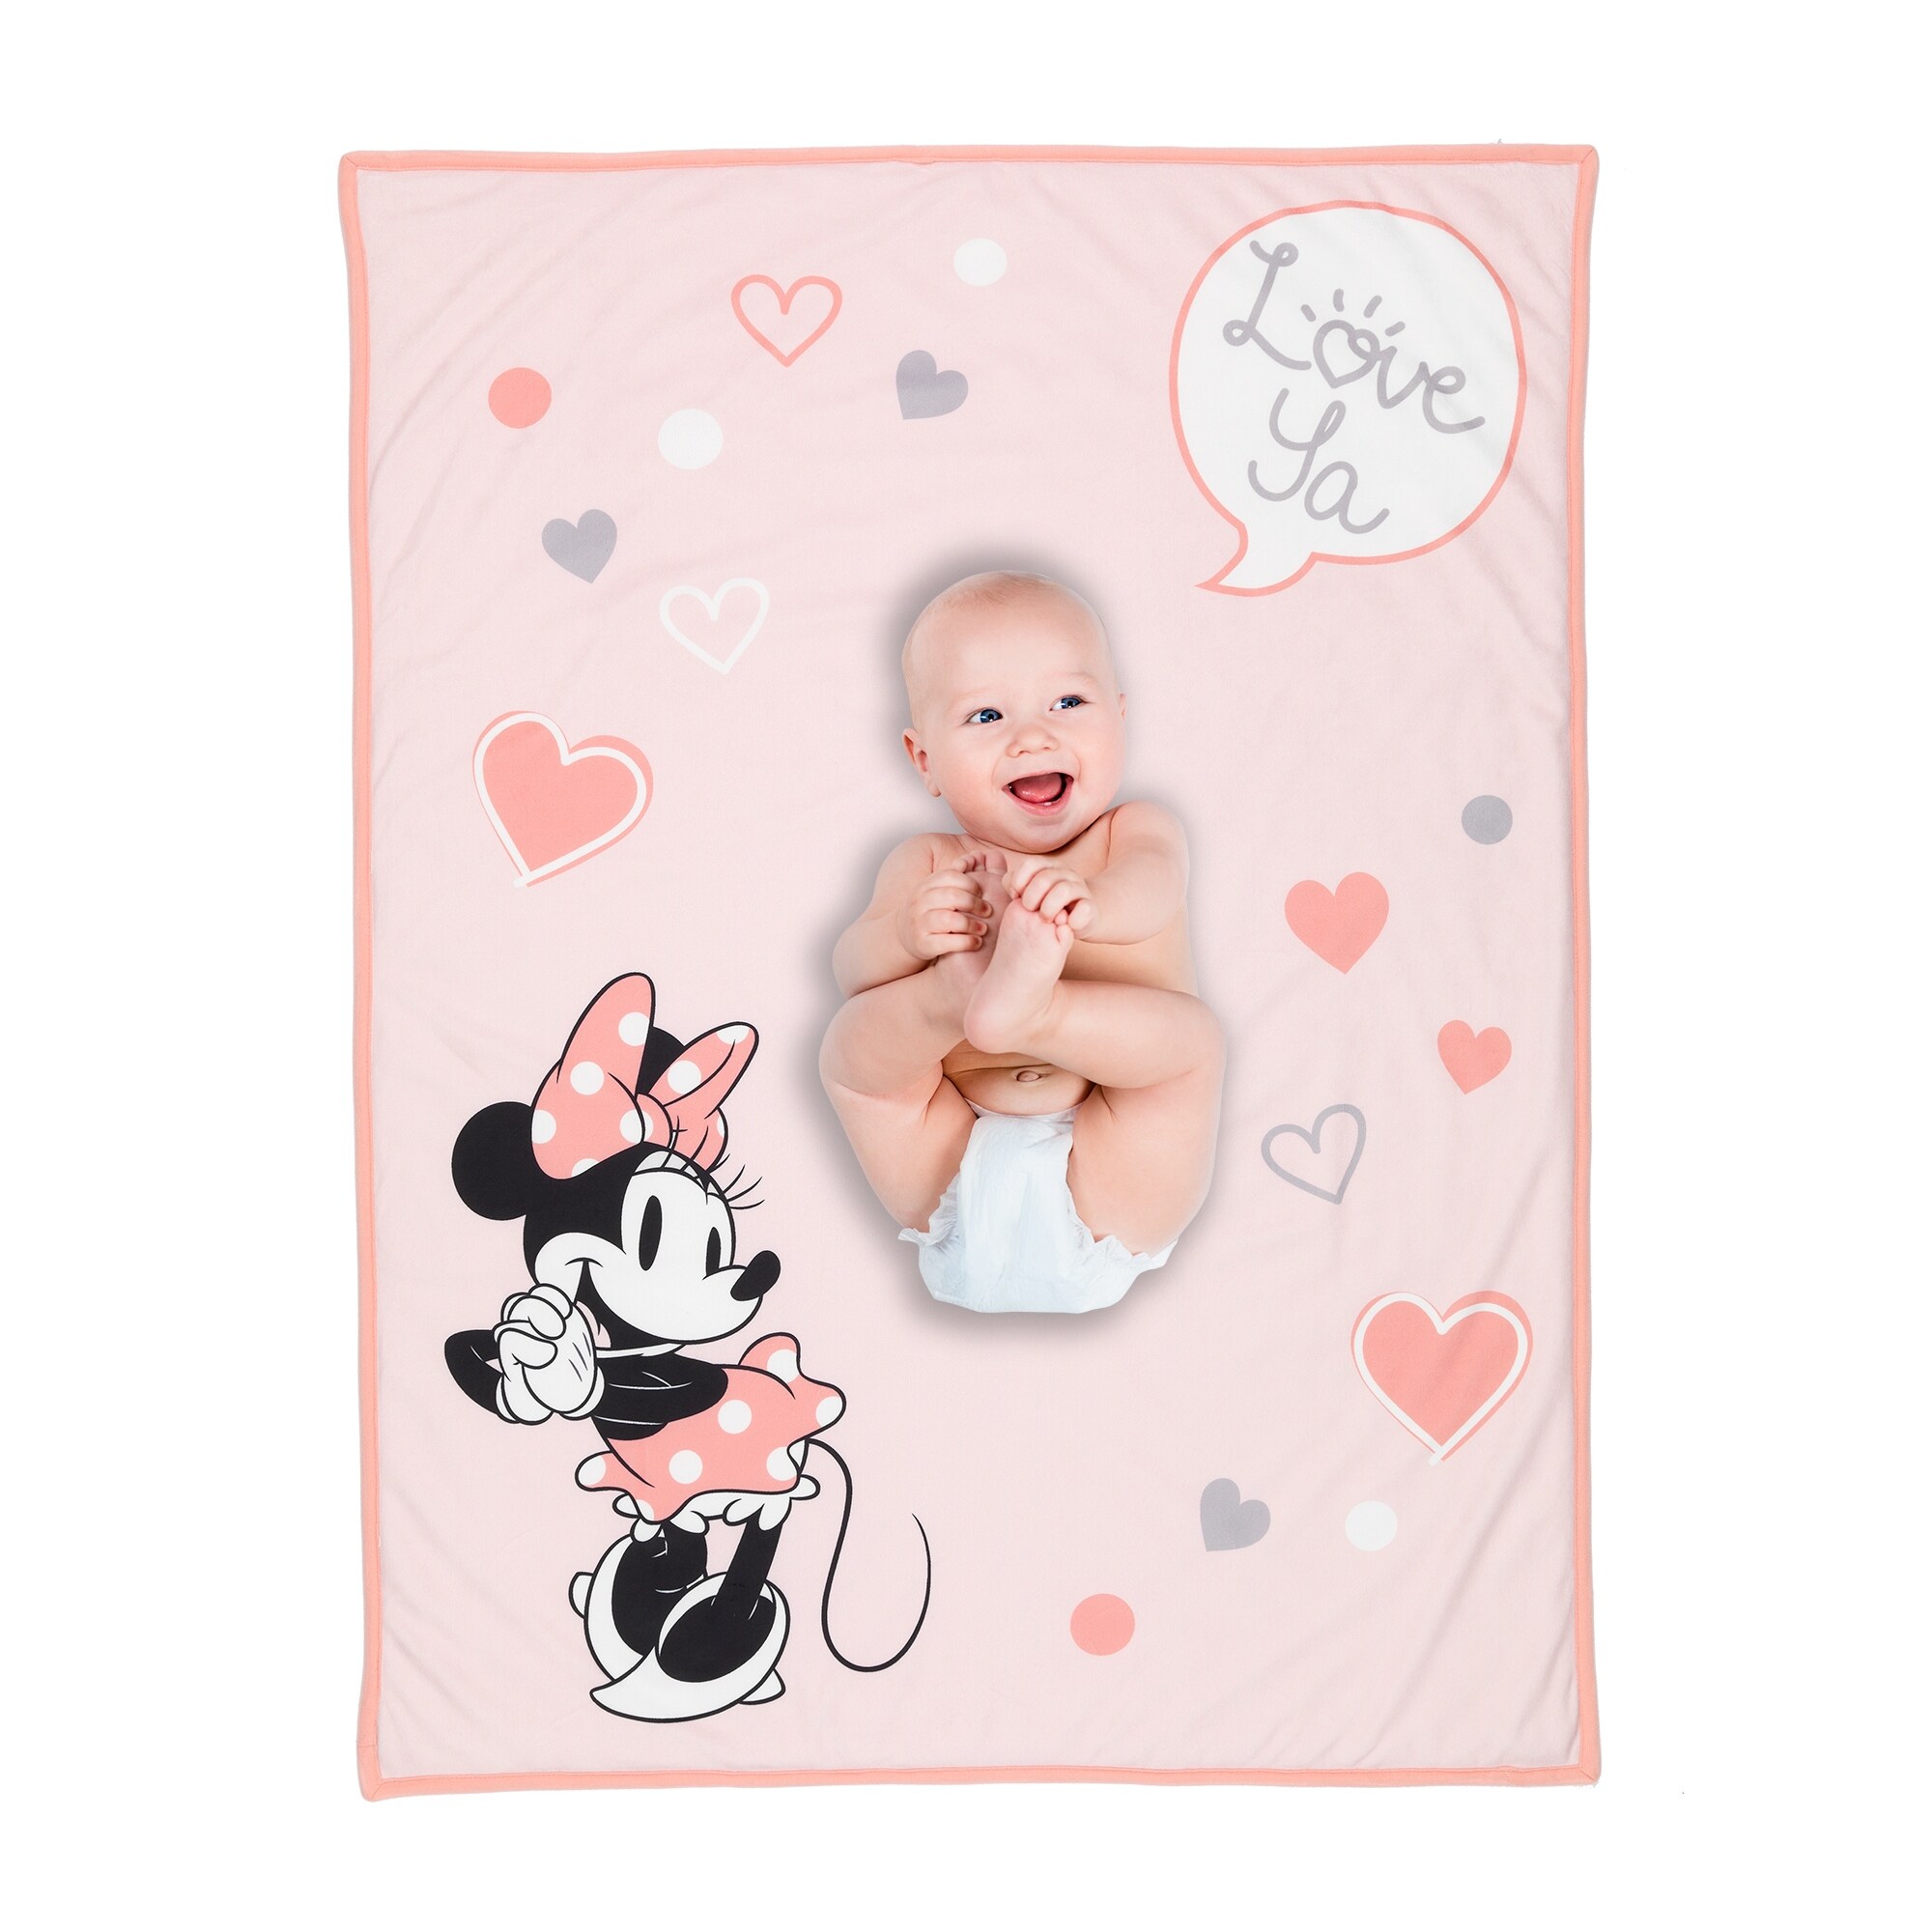 https://ak1.ostkcdn.com/images/products/is/images/direct/d55c0a4661c54ff5ed268758d41aa9562c4032a6/Lambs-%26-Ivy-Disney-Baby-Minnie-Mouse-Picture-Perfect-Pink-Sherpa-Baby-Blanket.jpg